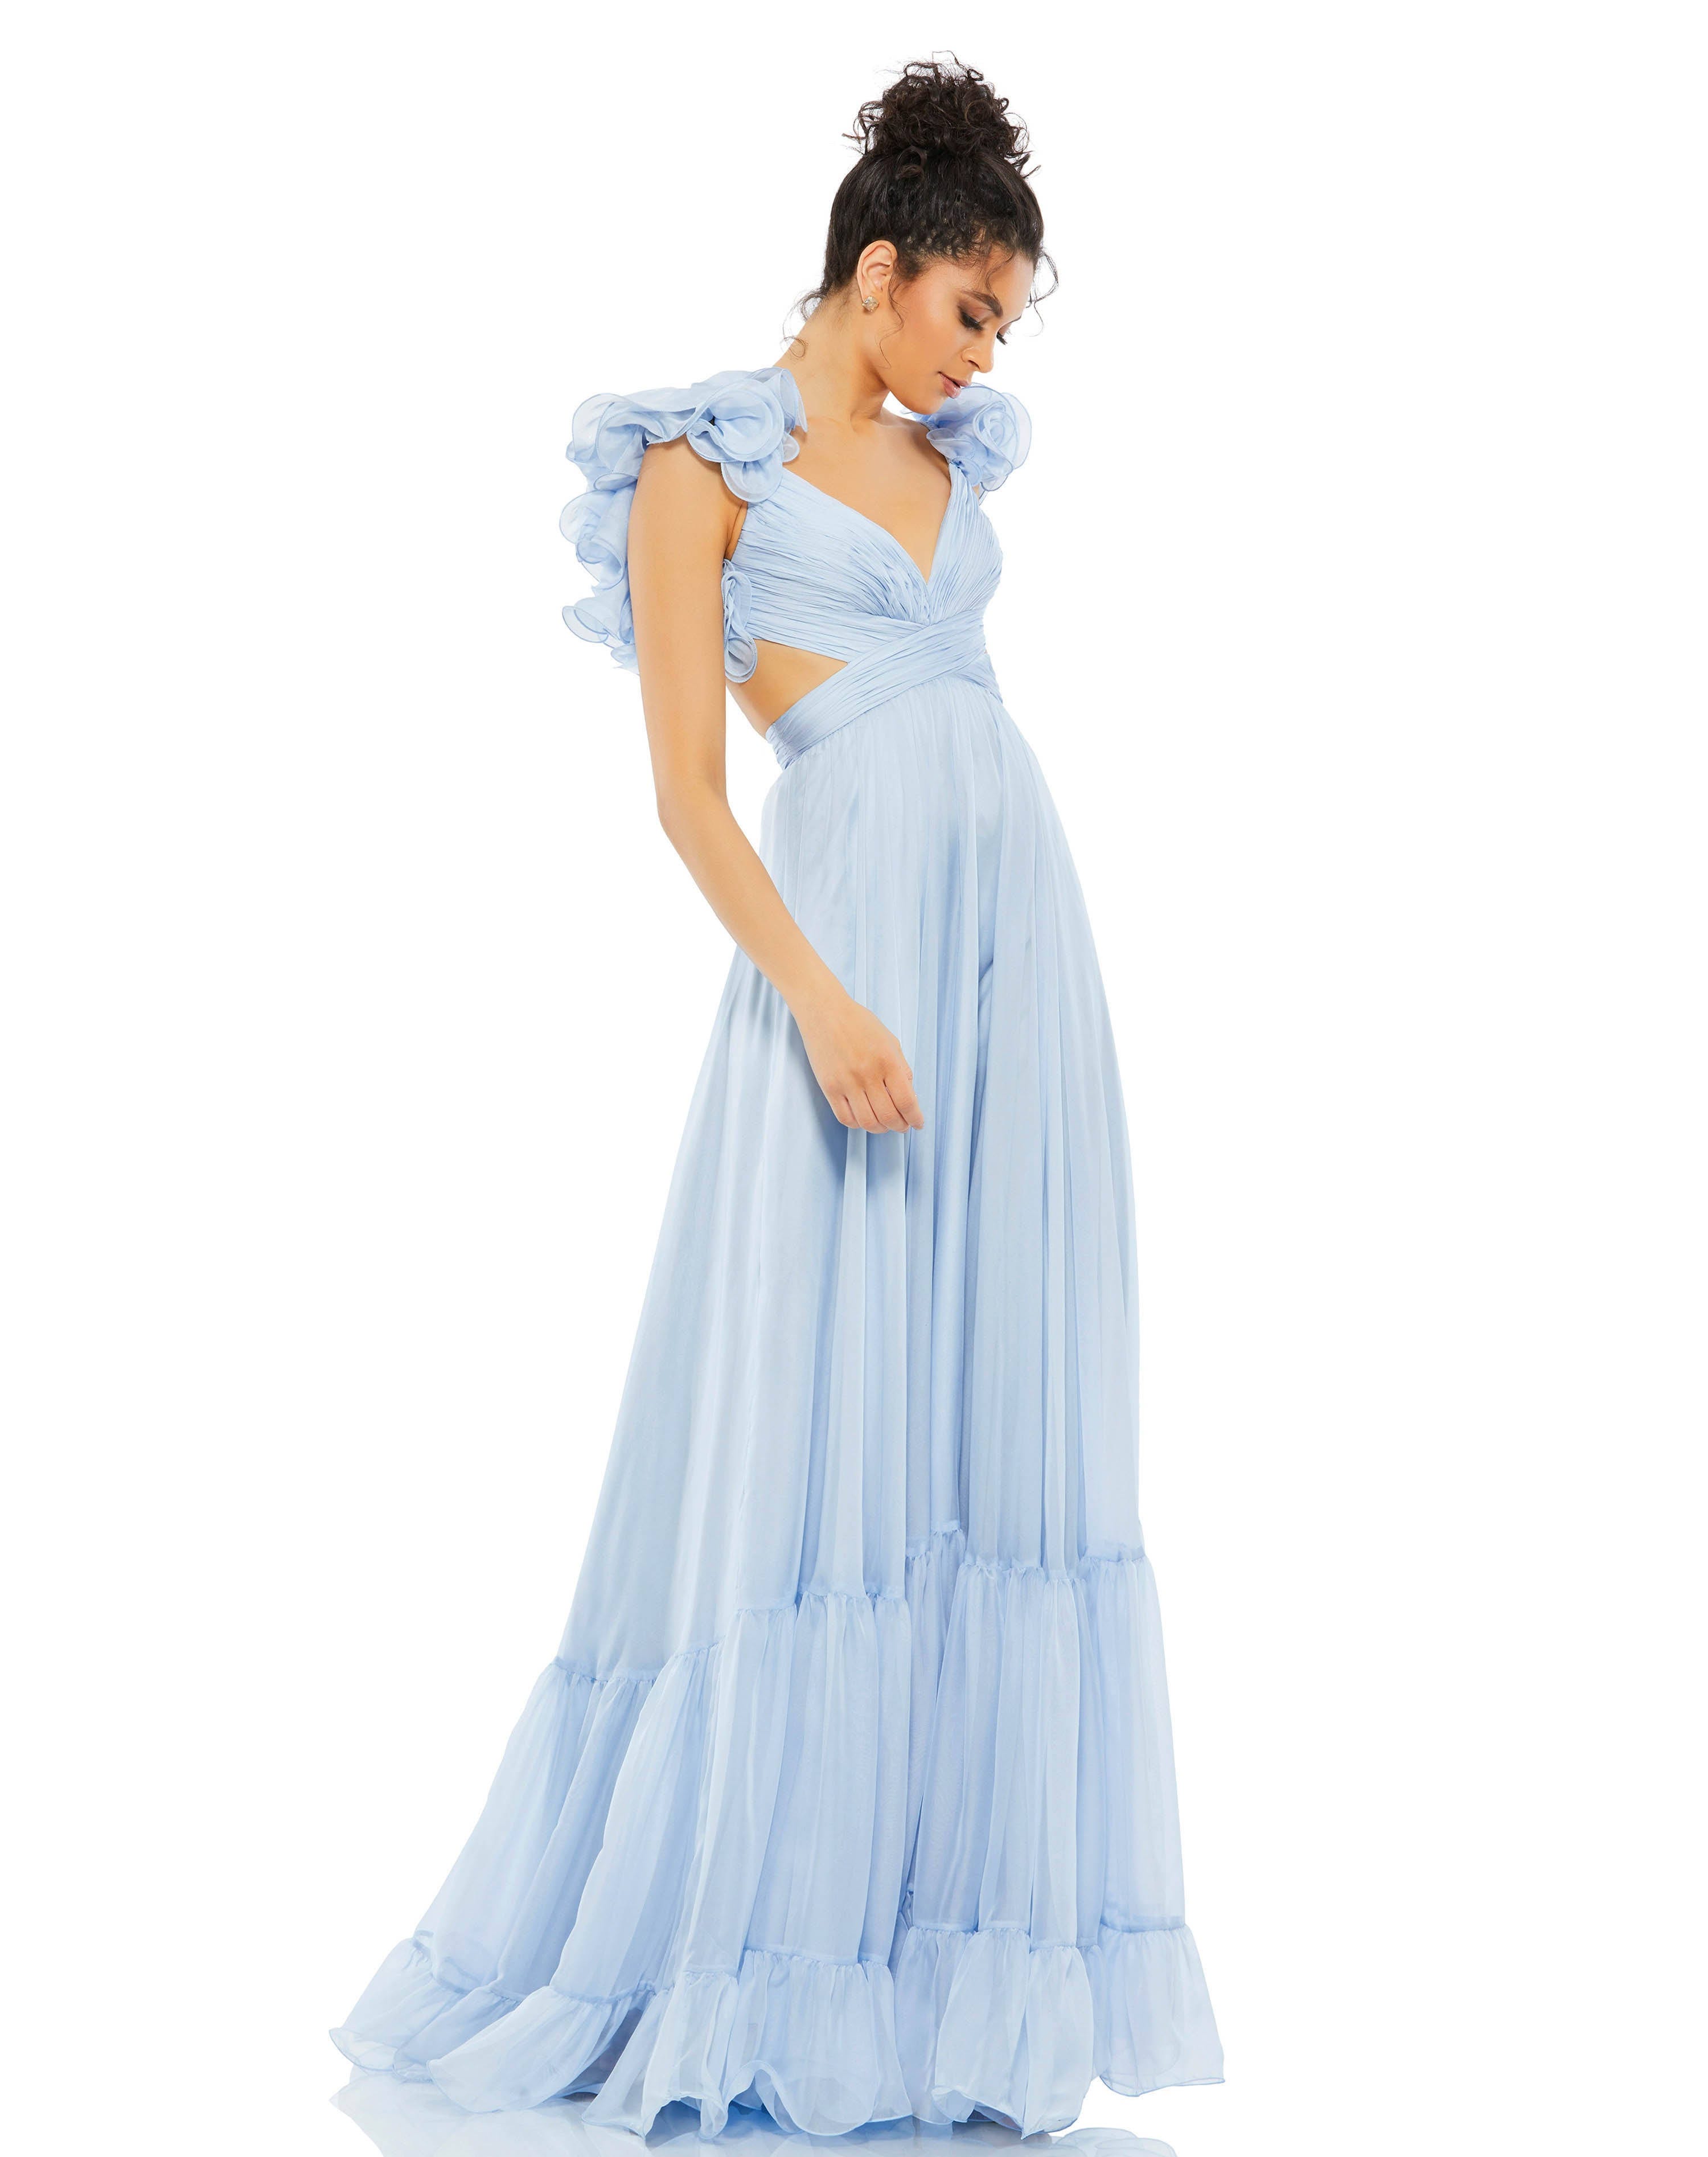 Chiffon Powder Blue Gown with V-Neck and Side Cutouts | Image